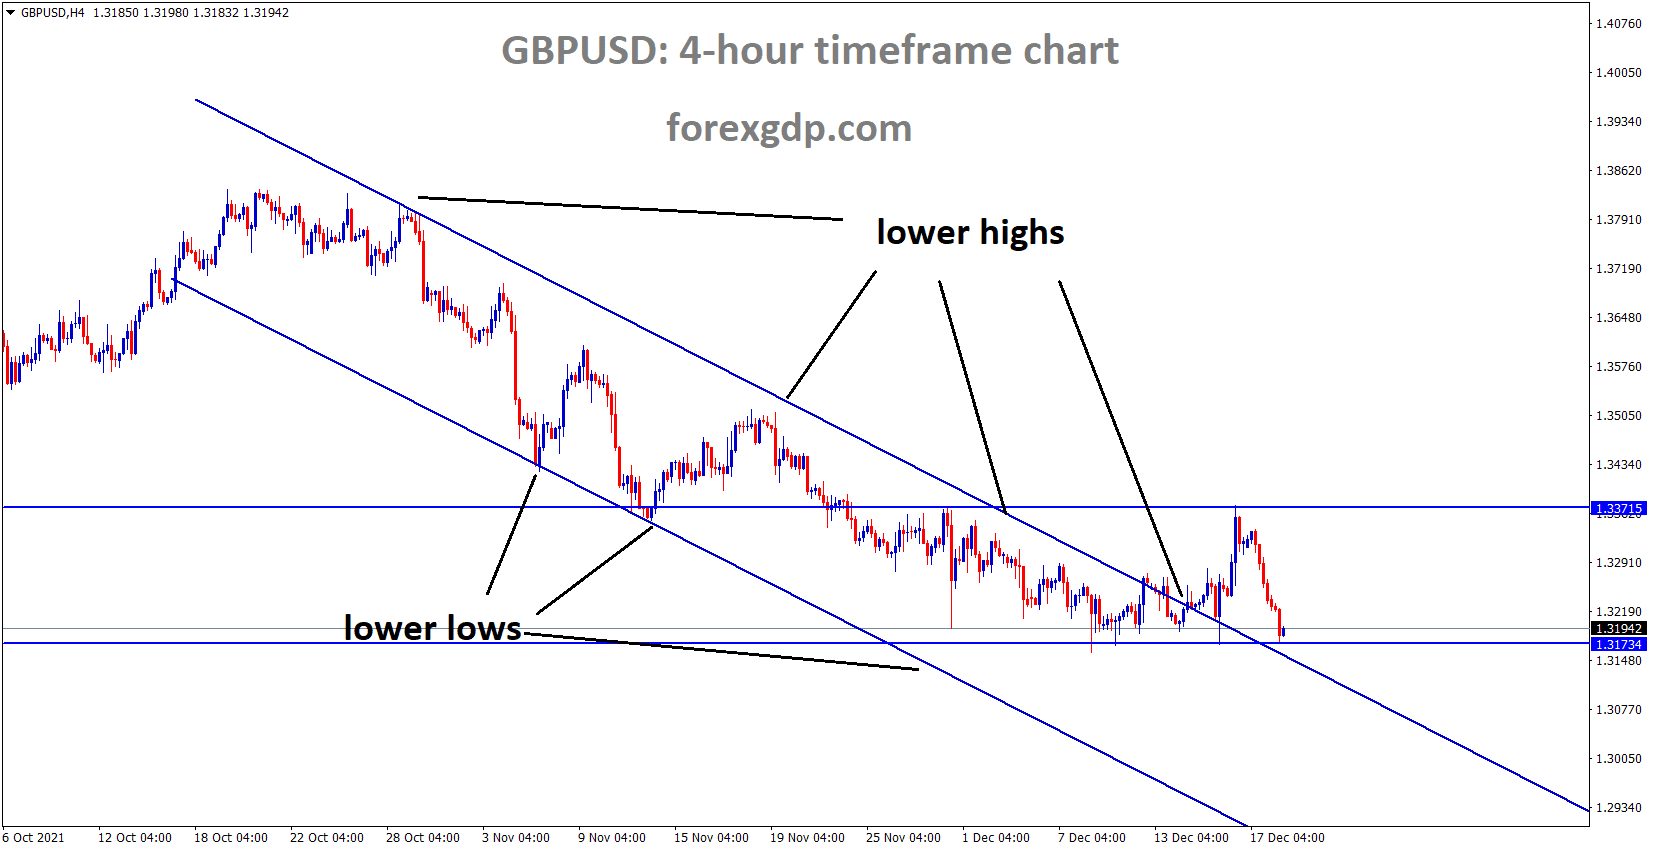 GBPUSD is moving in the Descending channel and the market consolidated at the lower low area of the channel